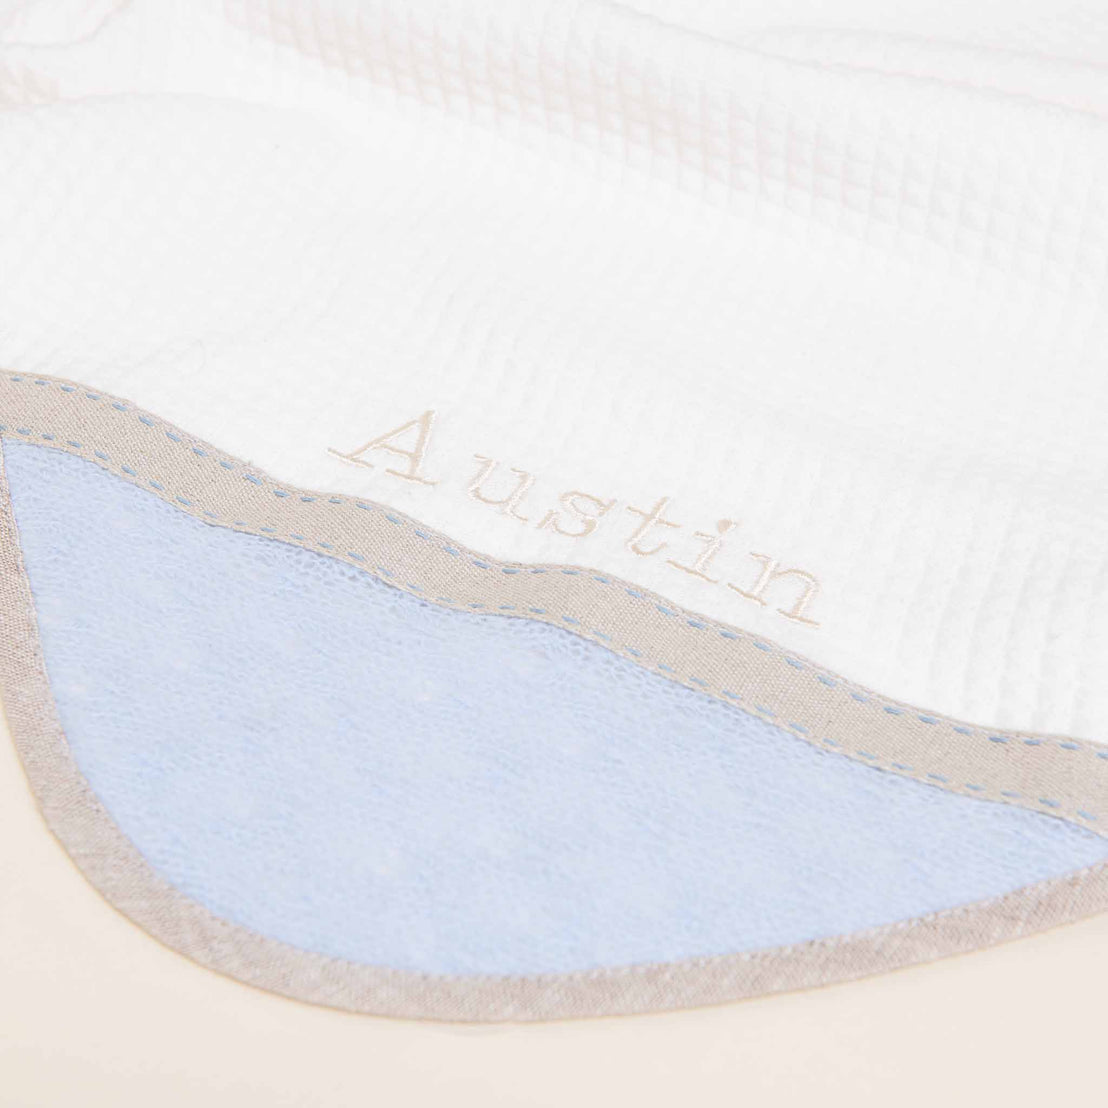 Close-up of an upscale, personalized Austin Blanket with the name "Austin" embroidered in elegant script on a blue and white fabric with a textured pattern, perfect for a coming home occasion.